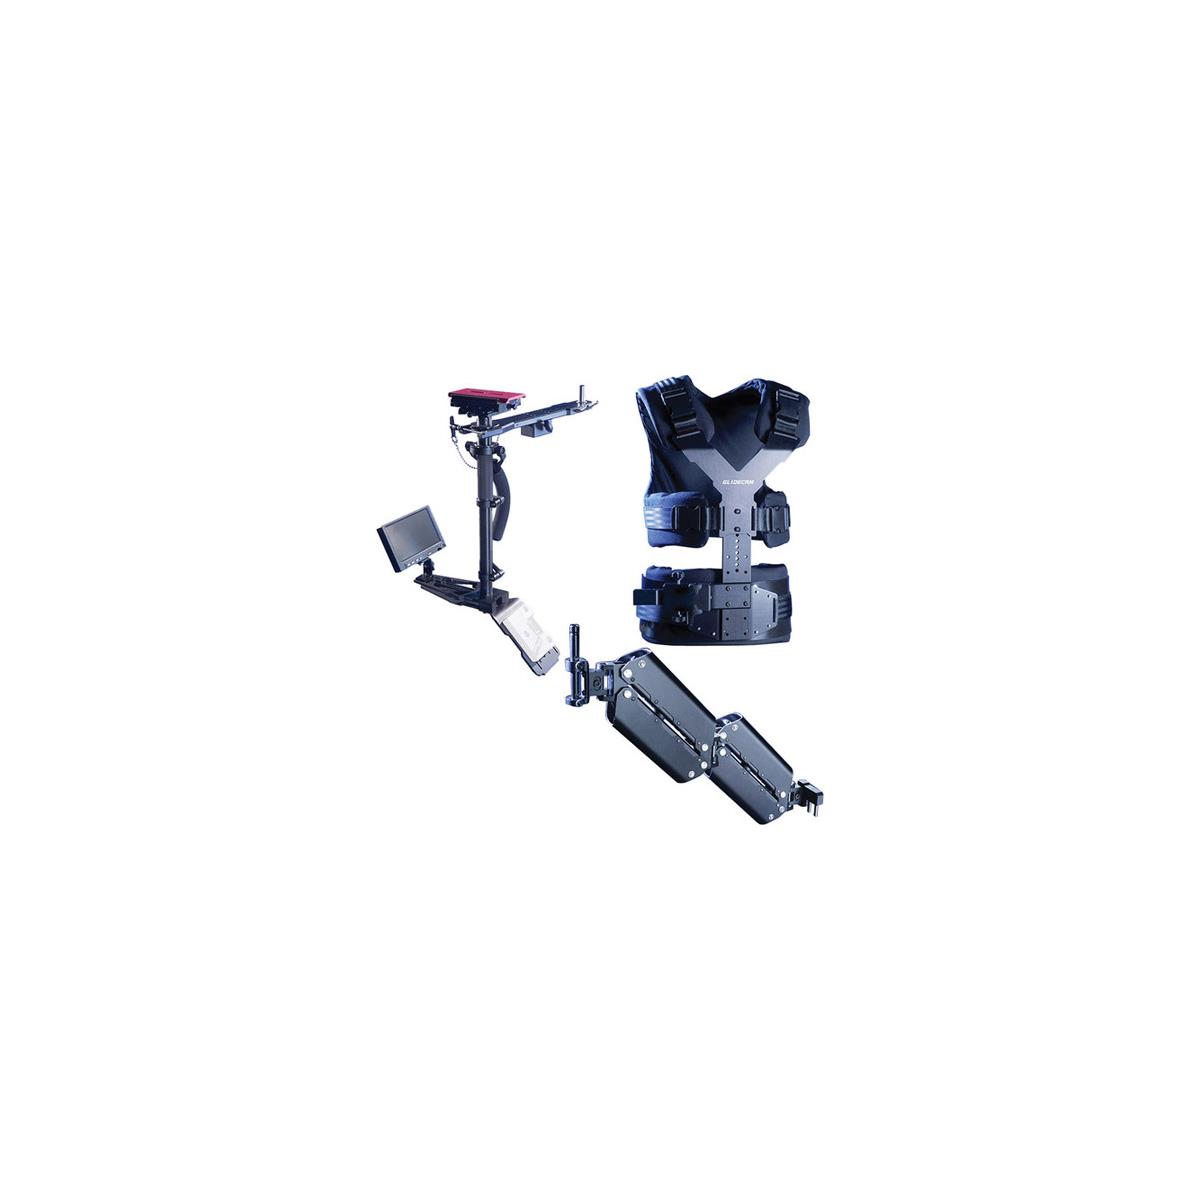 Image of Glidecam X-20 Professional Camera Stabilization System